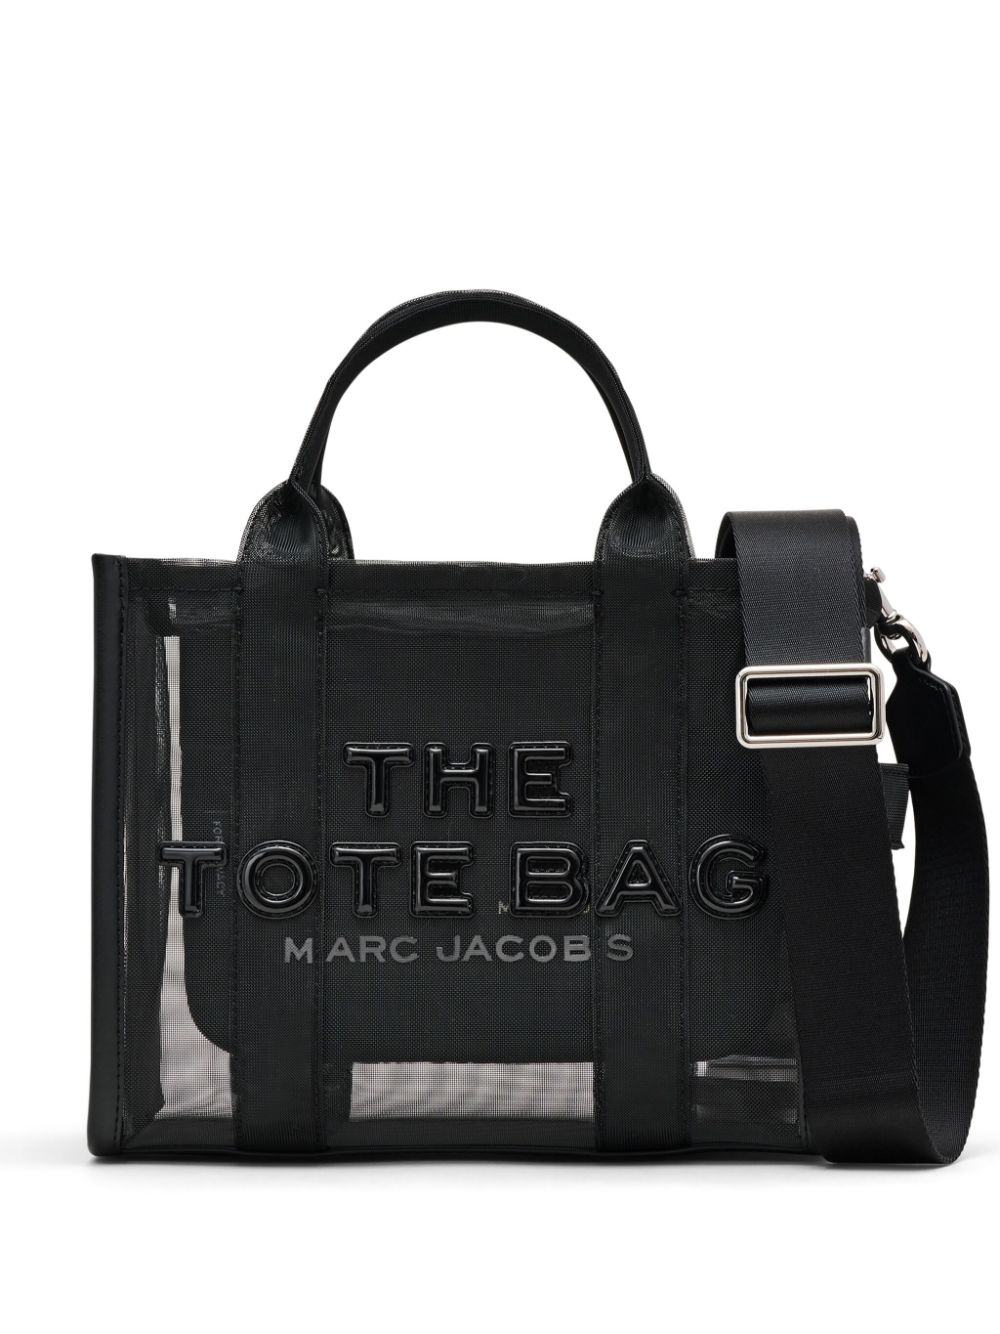 Image 1 of Marc Jacobs tote The Small Mesh Tote